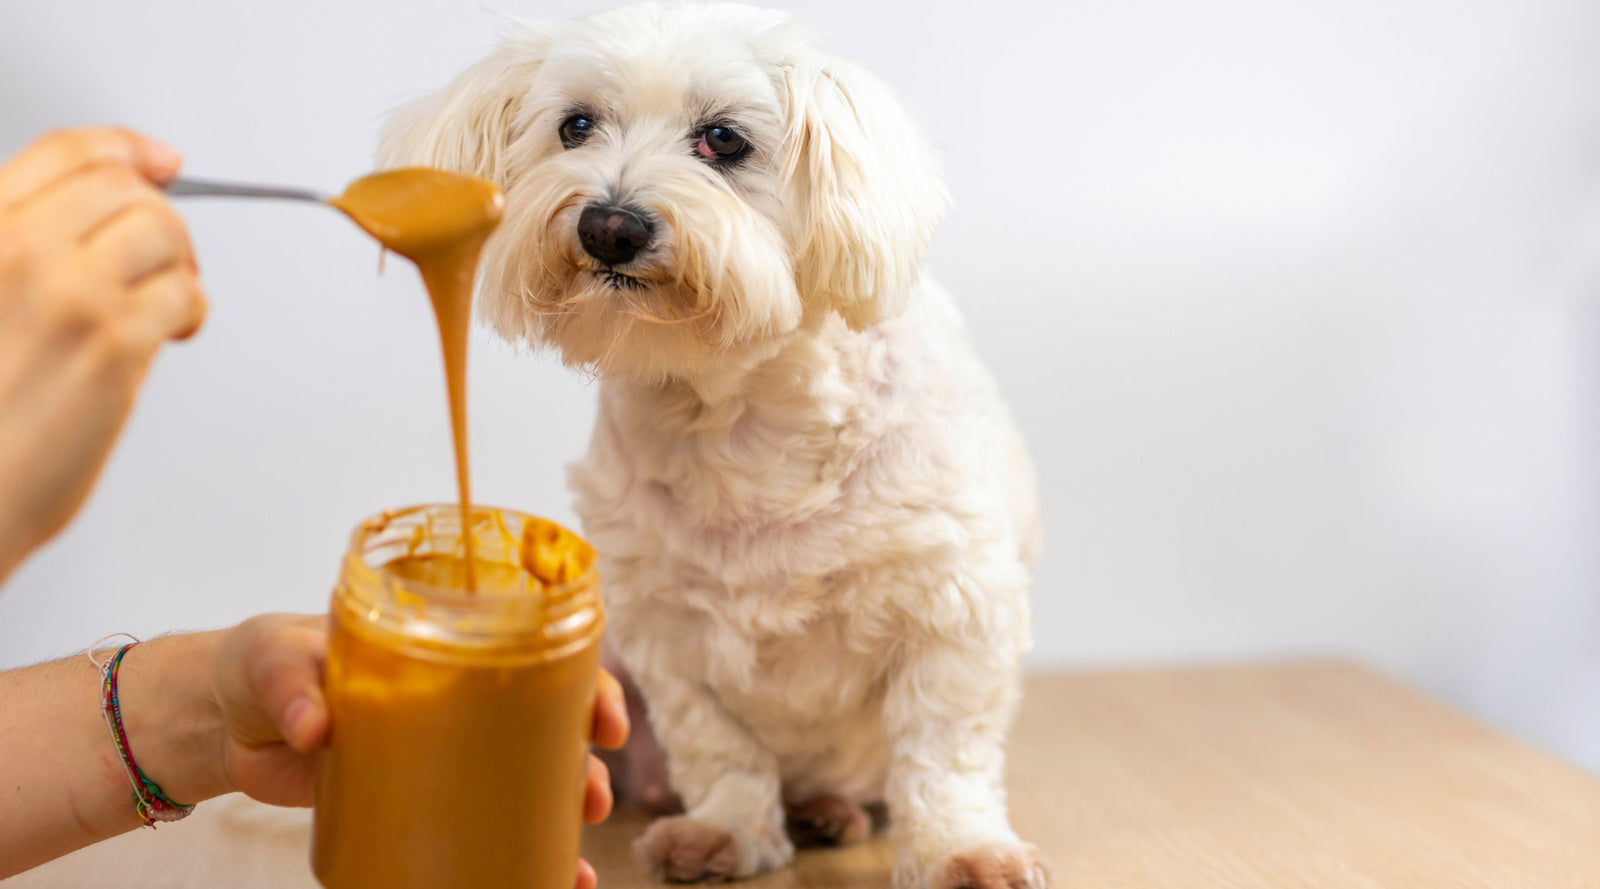 Buy Creamy Peanut Butter with Free Lick Mat | Dog for Dog